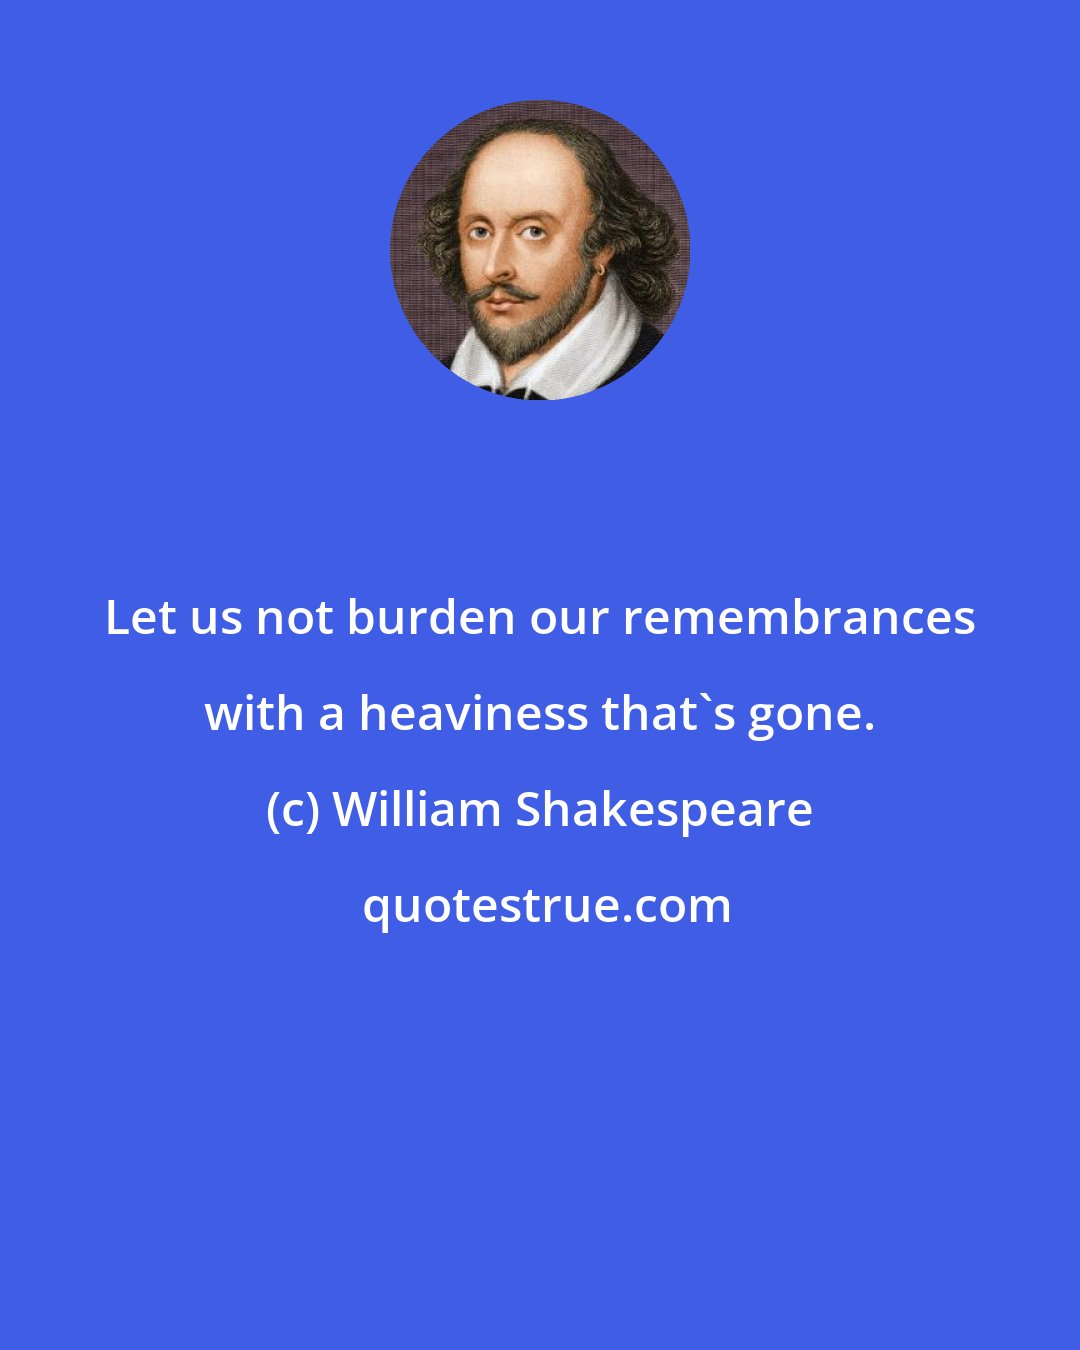 William Shakespeare: Let us not burden our remembrances with a heaviness that's gone.